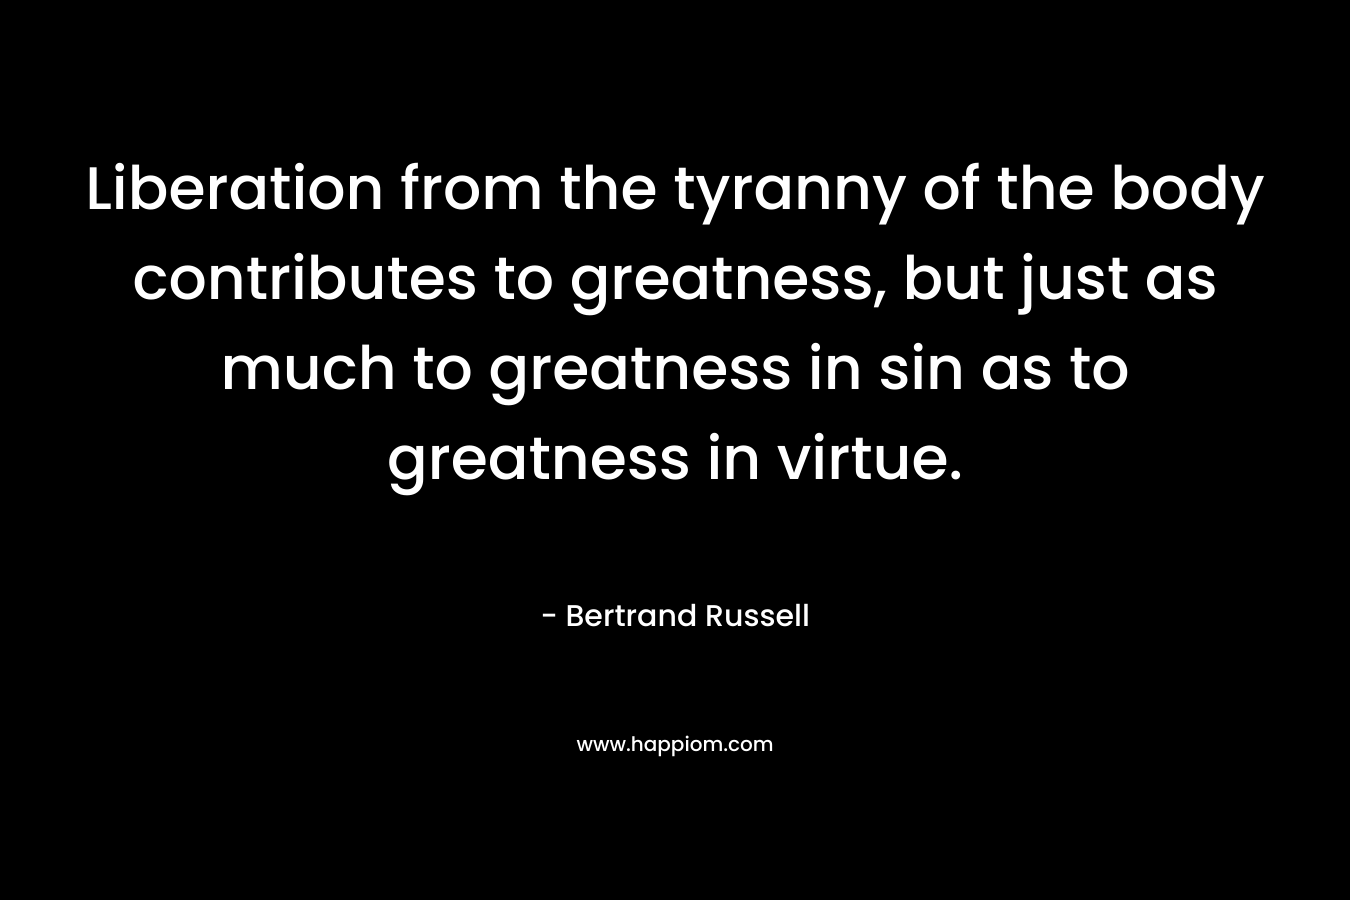 Liberation from the tyranny of the body contributes to greatness, but just as much to greatness in sin as to greatness in virtue. – Bertrand Russell